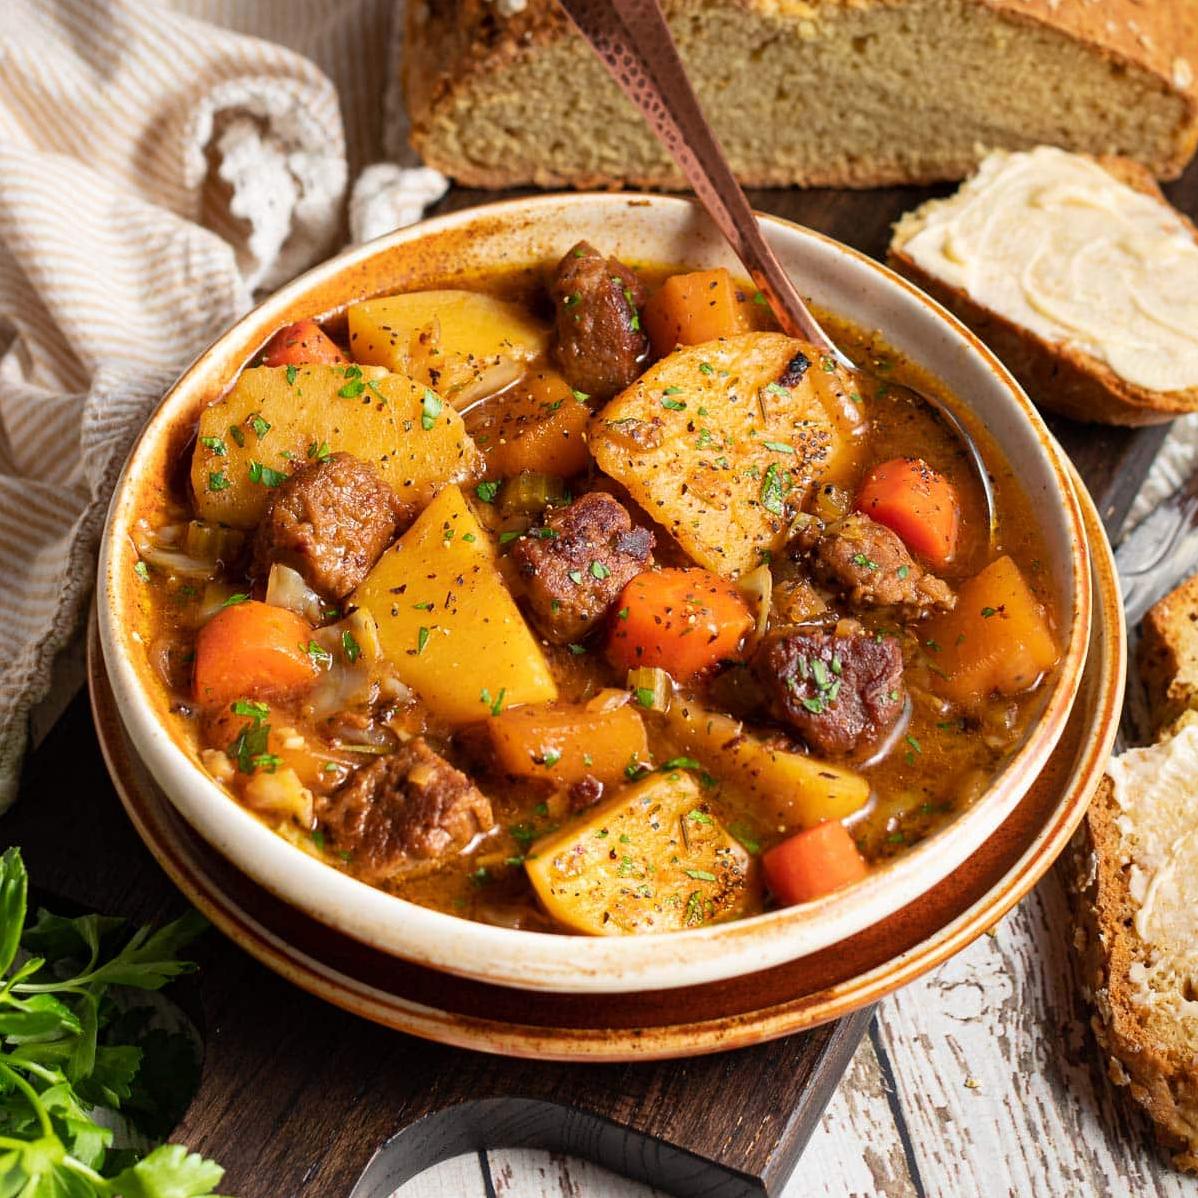  Get ready to savor each bite of this hearty stew